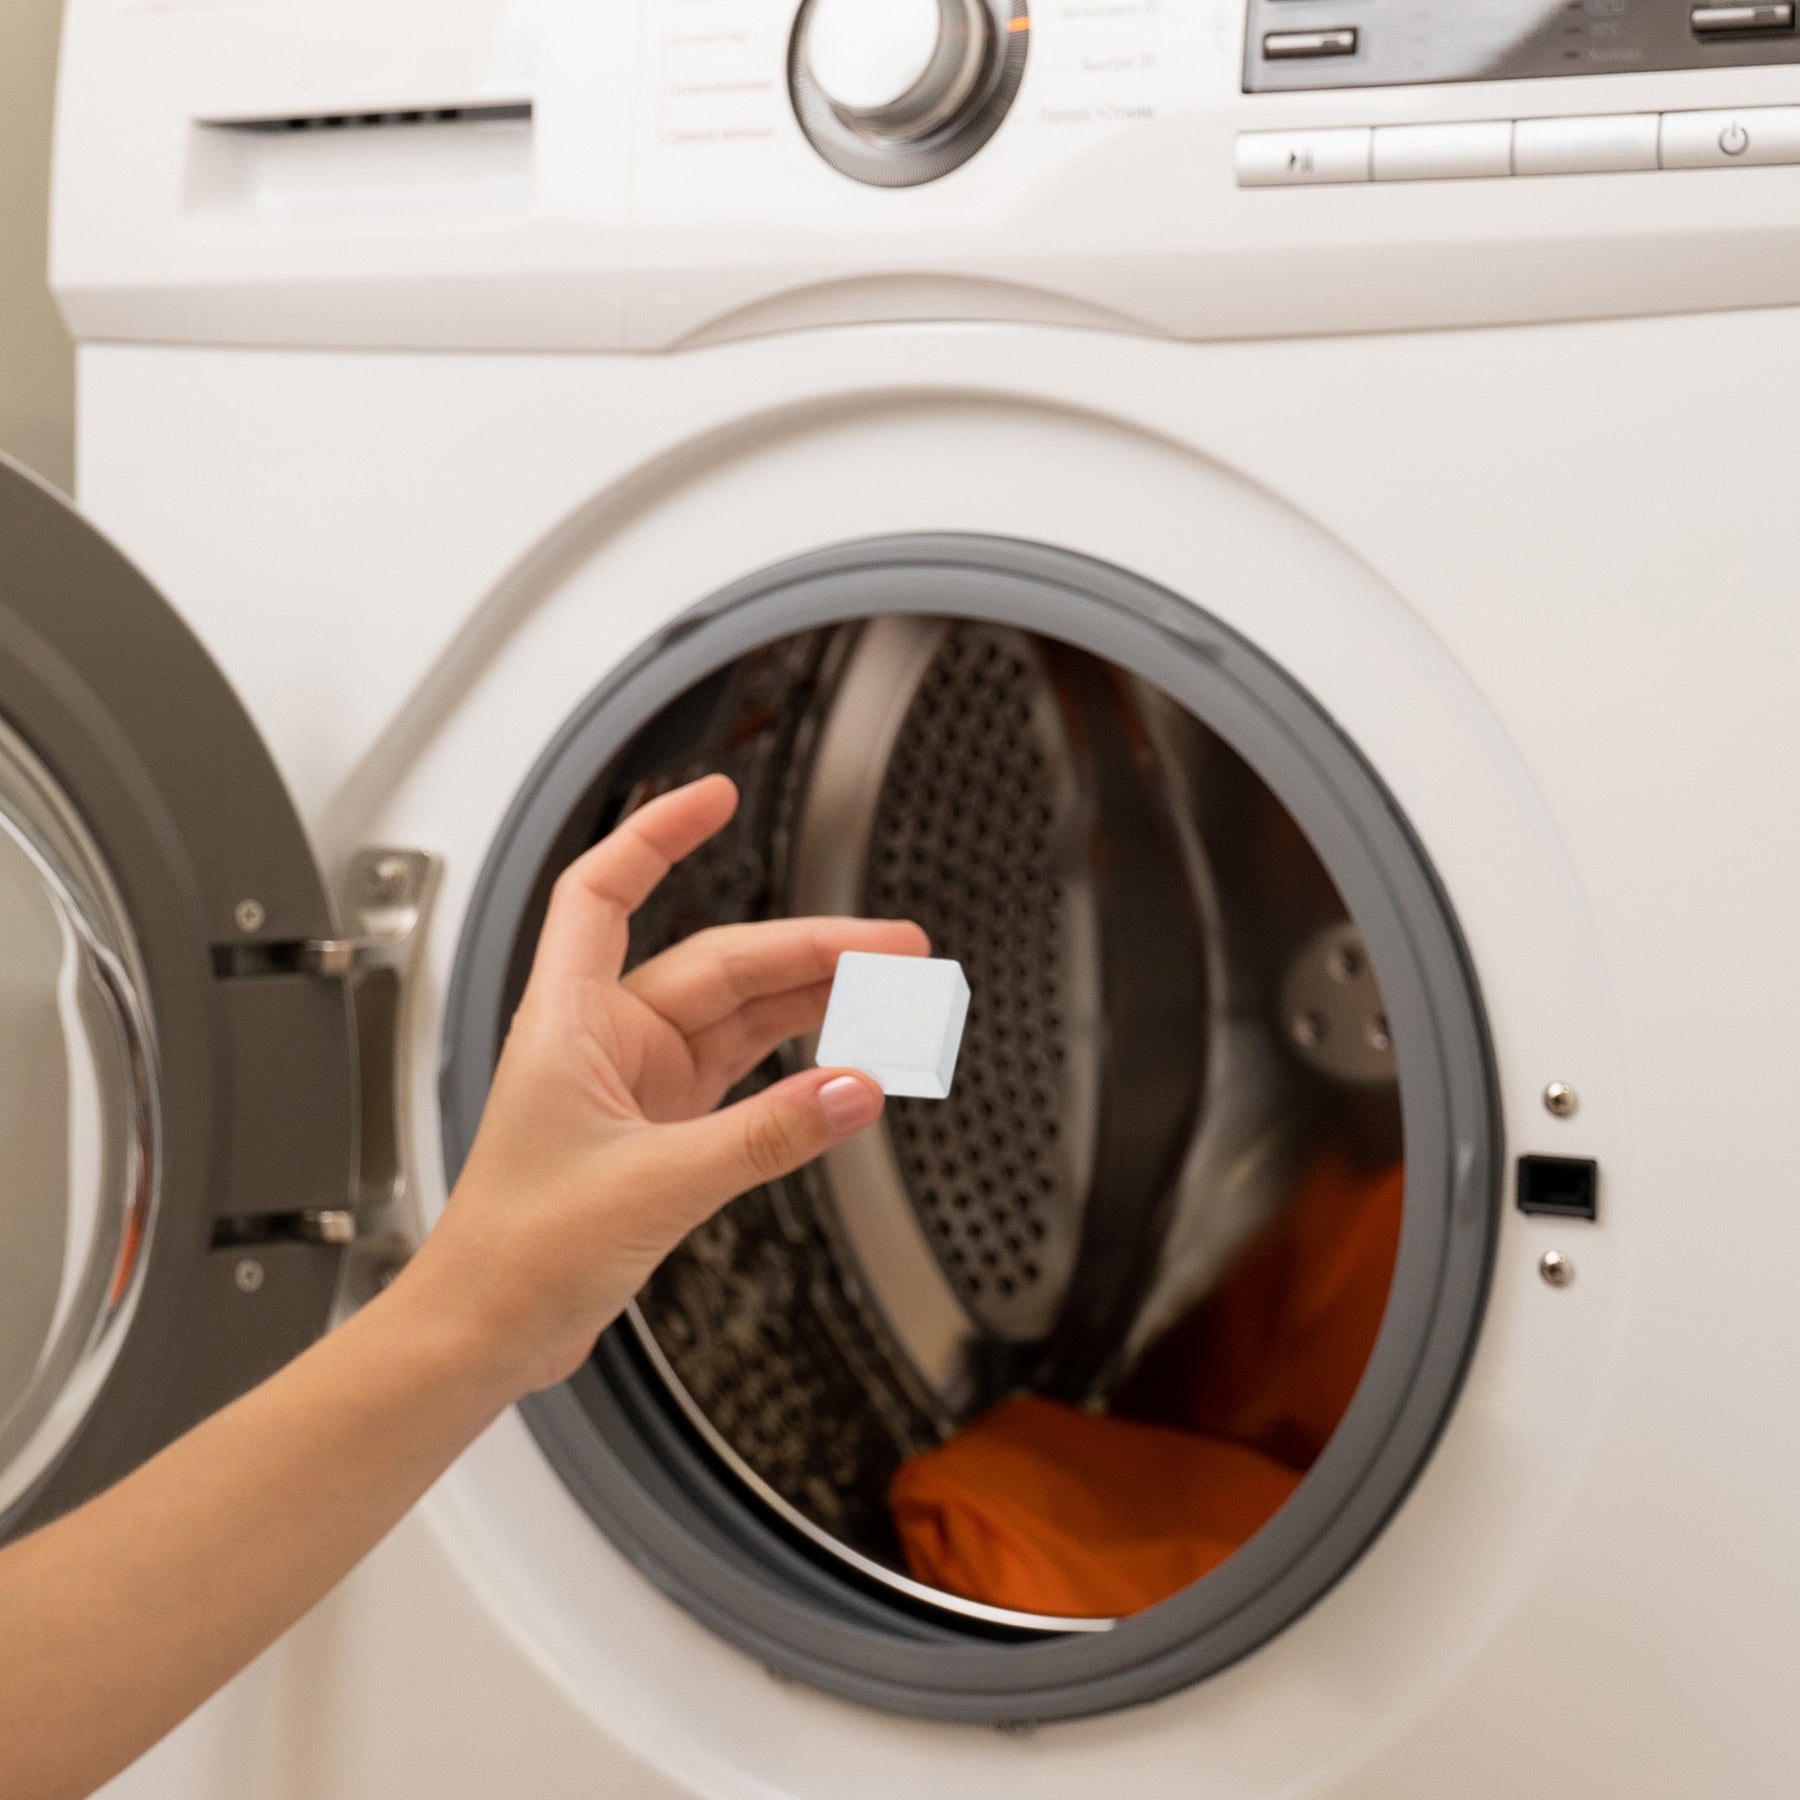 Load video: &lt;p&gt;Drop one FabTab into your washing machine&#39;s drum and watch the cleaning symphony unfold. If you&#39;ve got a mountain of laundry, go ahead and double the fun with two tablets – because who said cleaning can&#39;t have a twin-tastic twist?&lt;/p&gt;